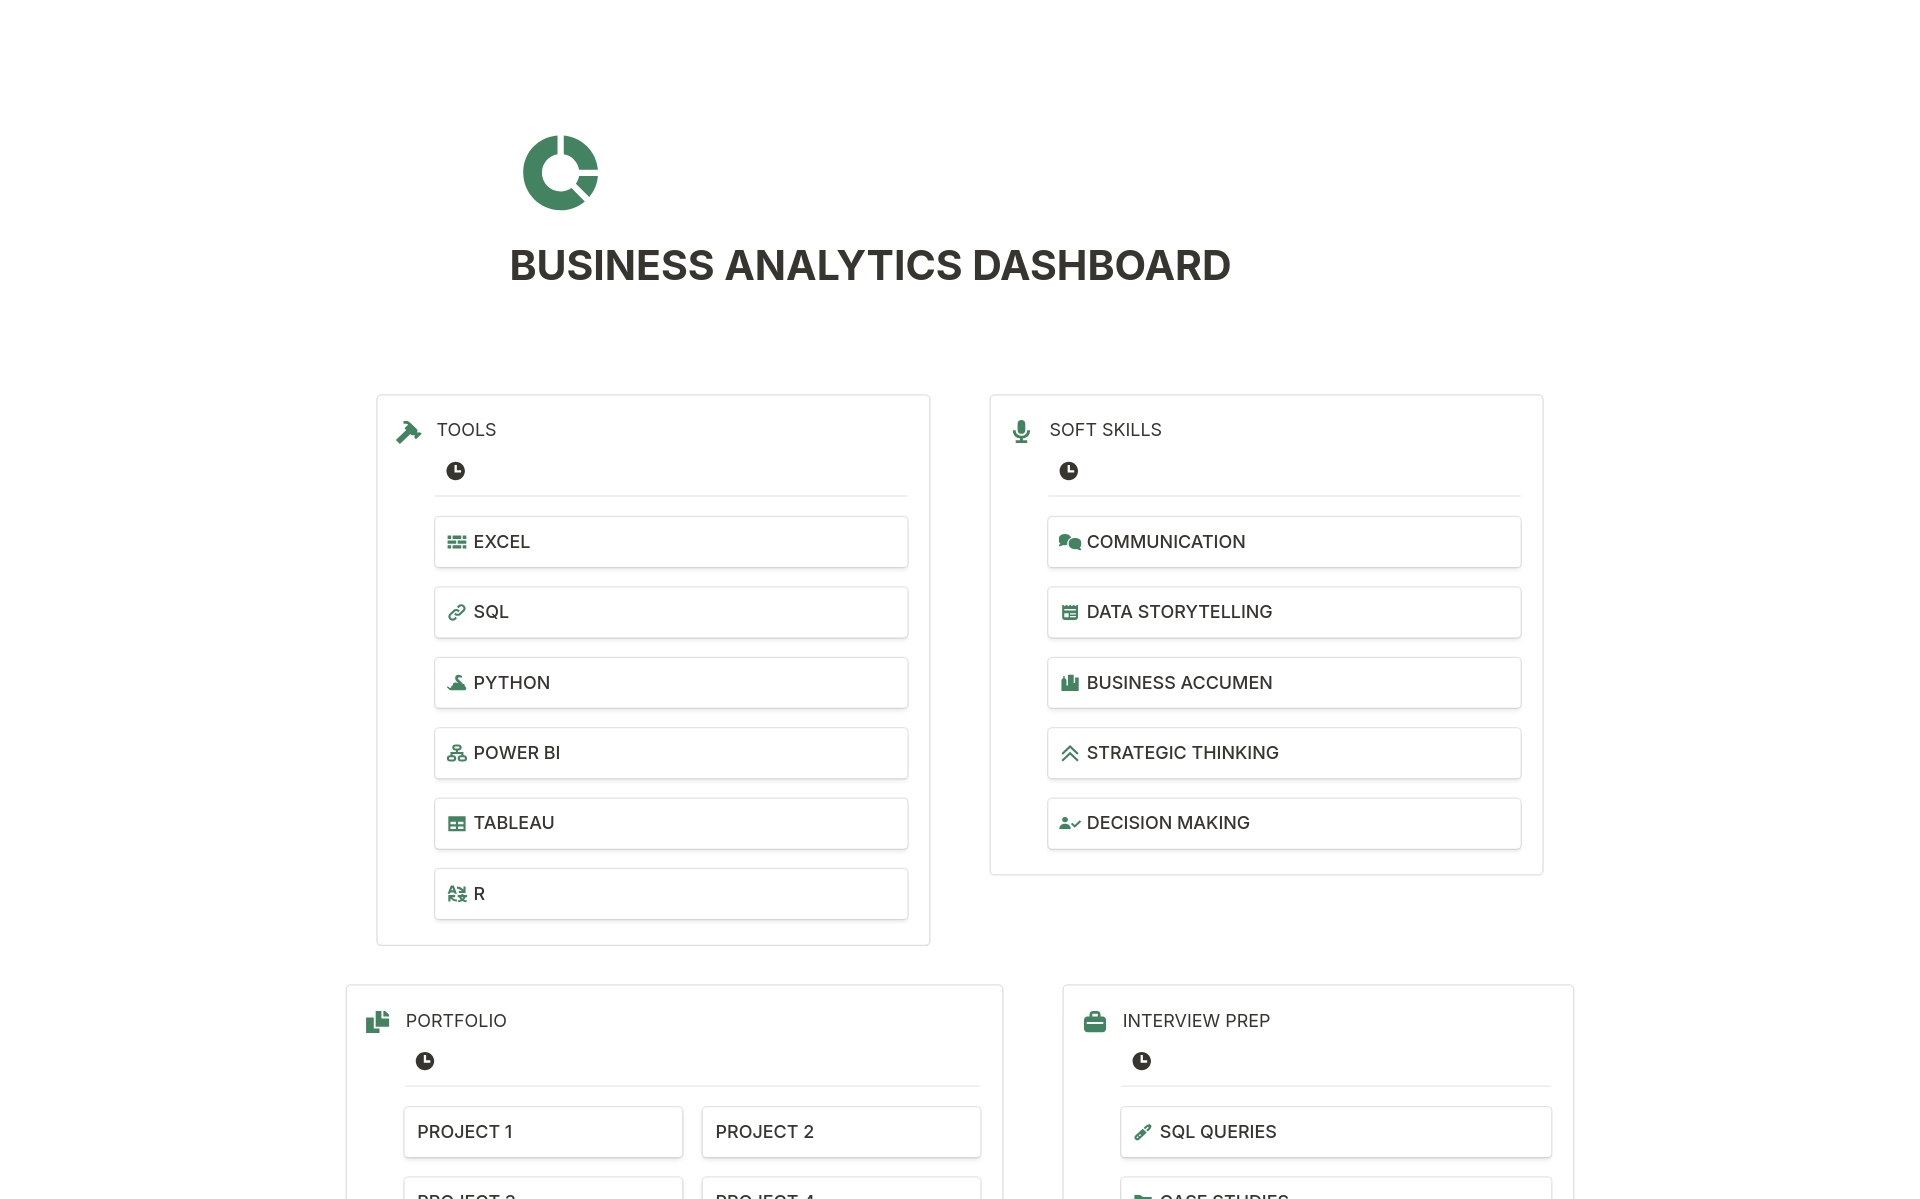 Template for aspiring Business Analysts 

Learn and organise your notes as you ace your knowledge in business analytics 

Includes - 
: Tools
: Softskills 
: Portfolio
: Interview Prep